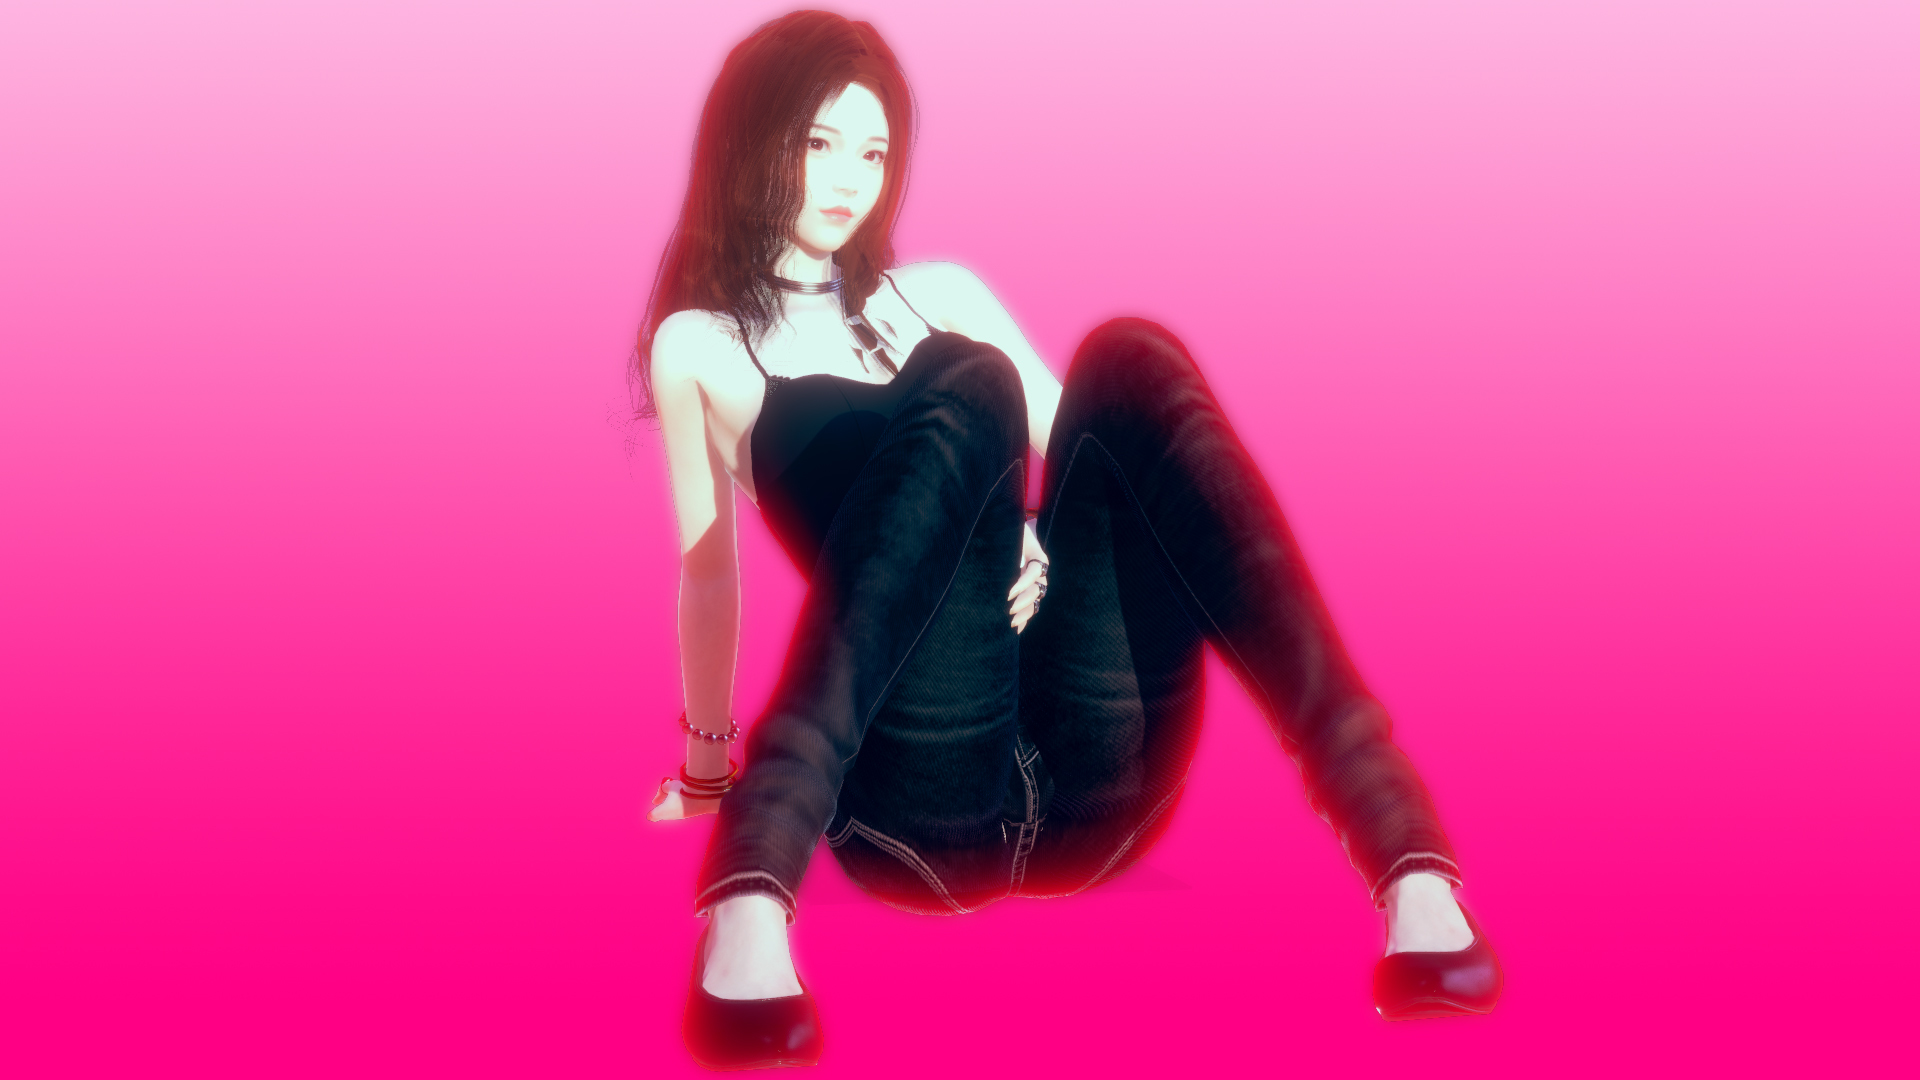 Image For Post | Bae Suzy Honey Select 2